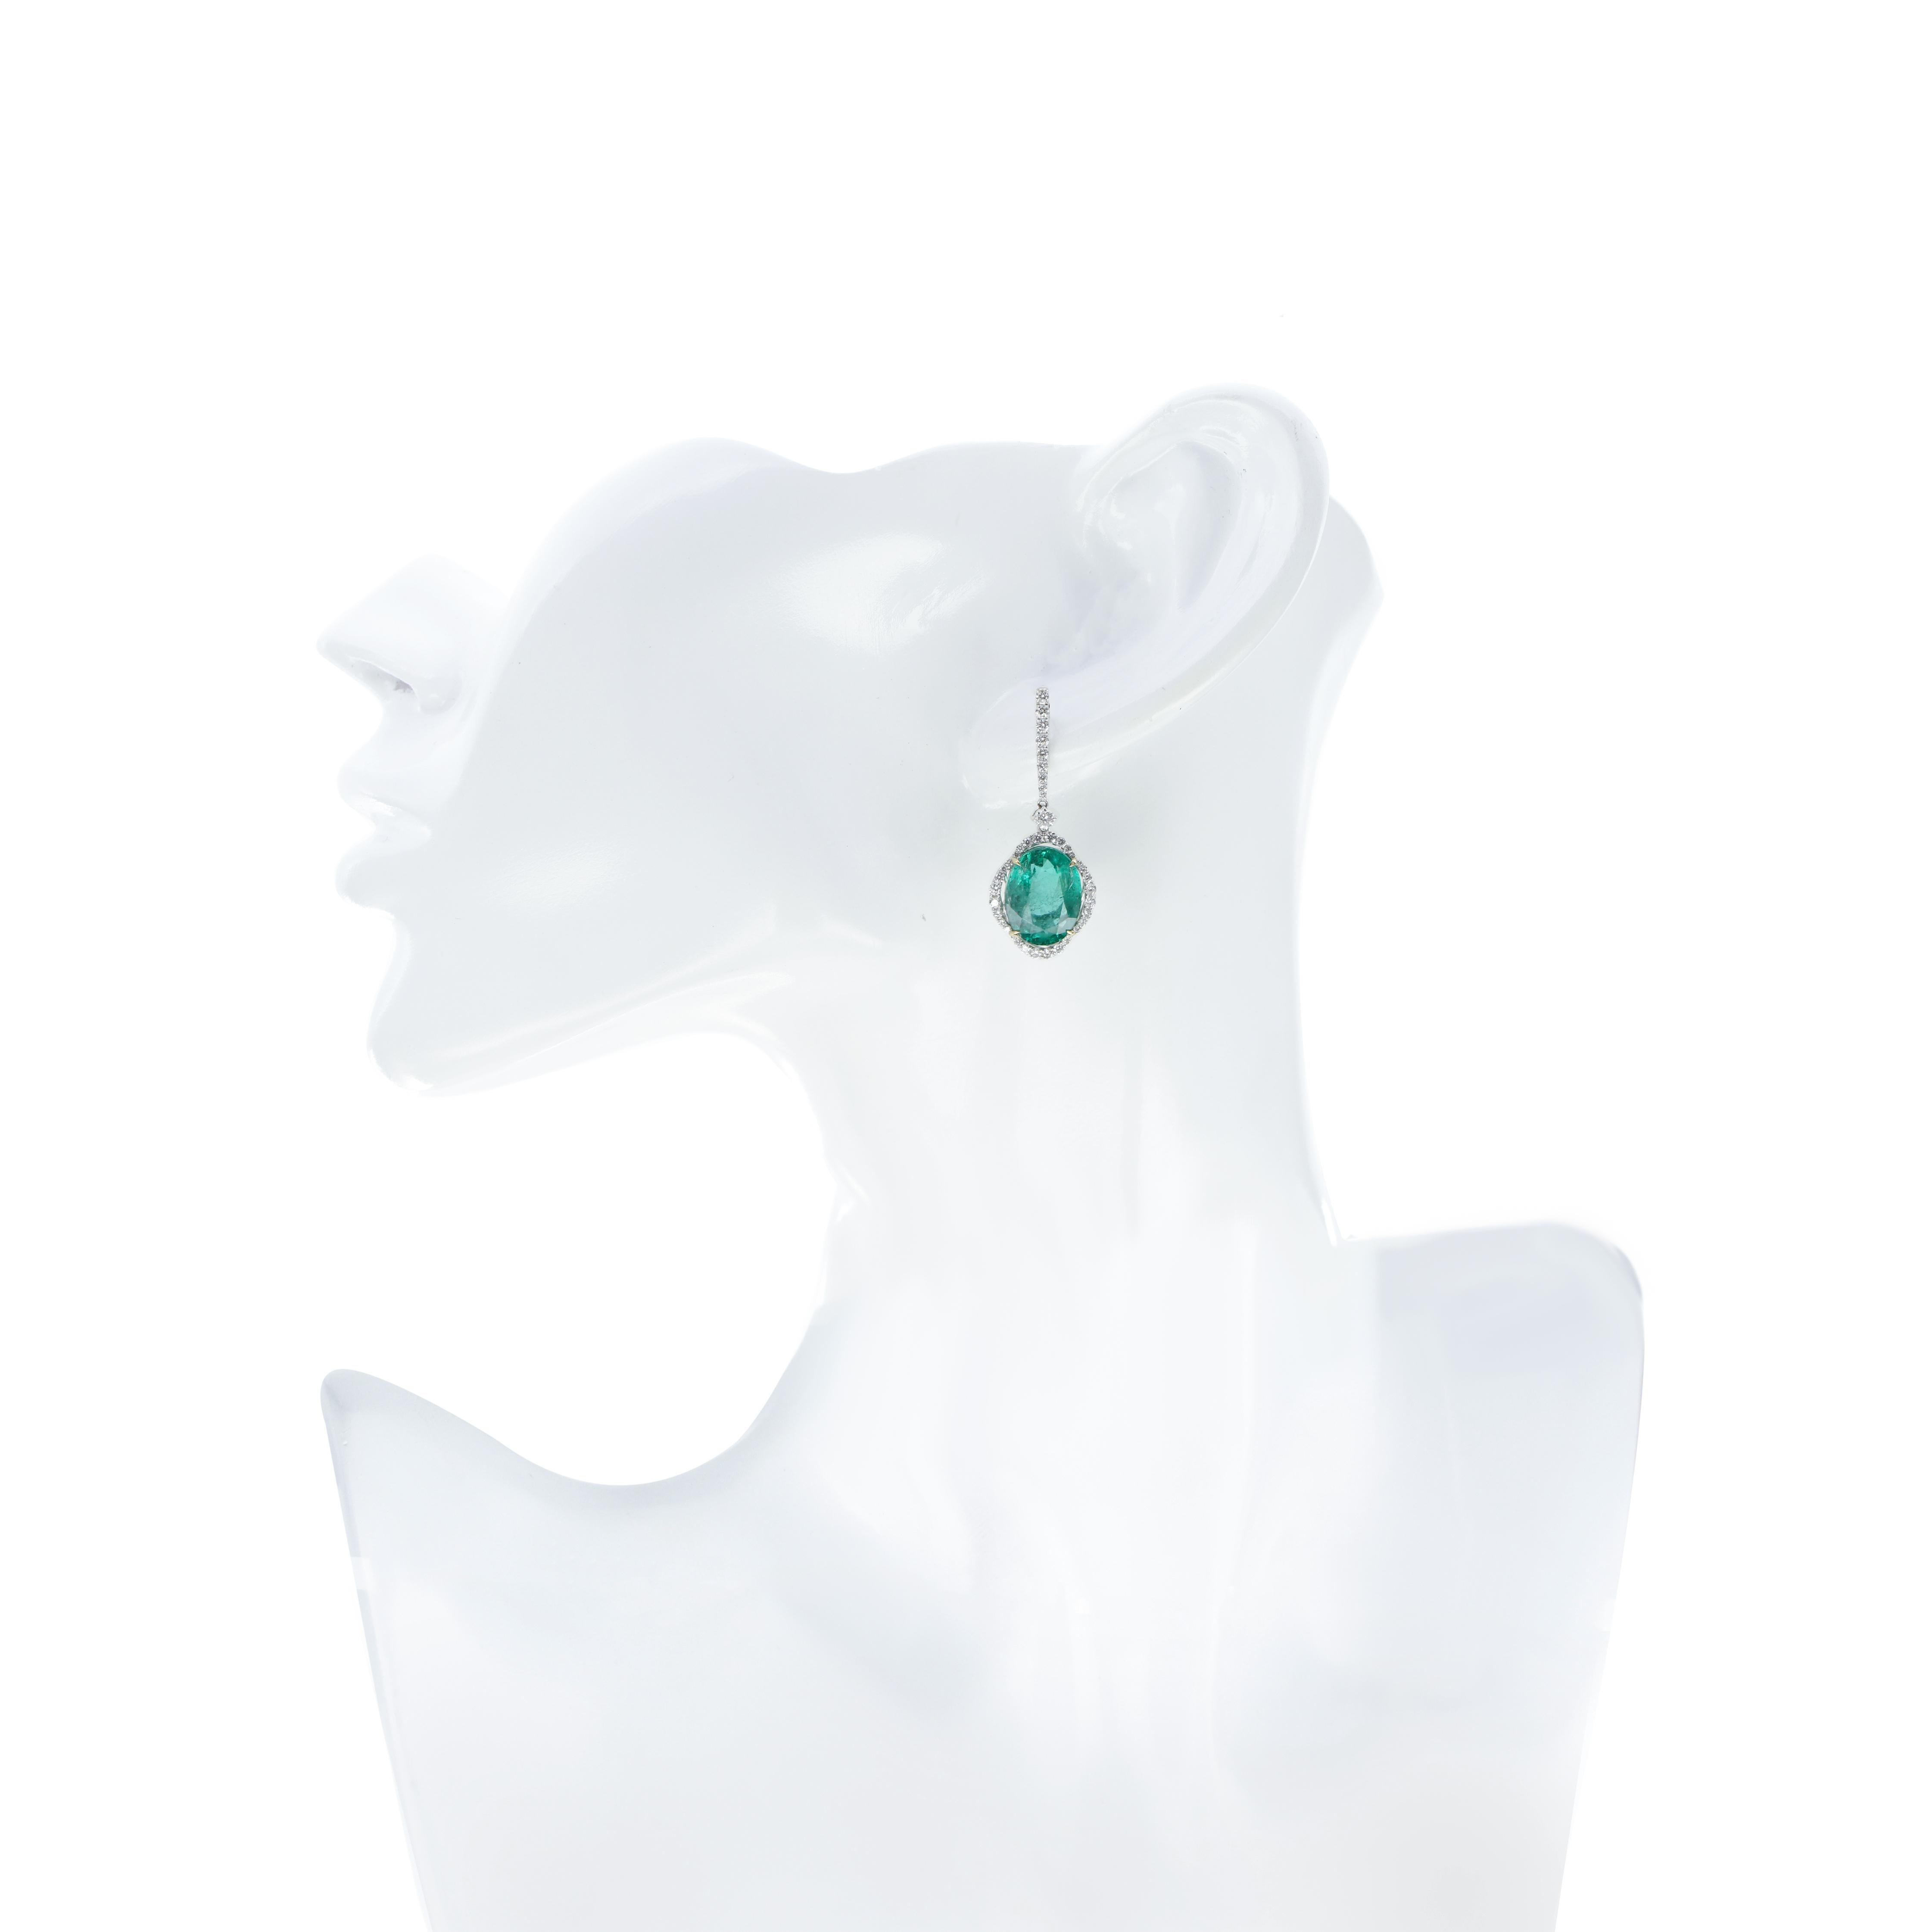  Emeralds and Daimond Drop Earrings in 18 Karat White Gold Hand-Craft Earring For Sale 1